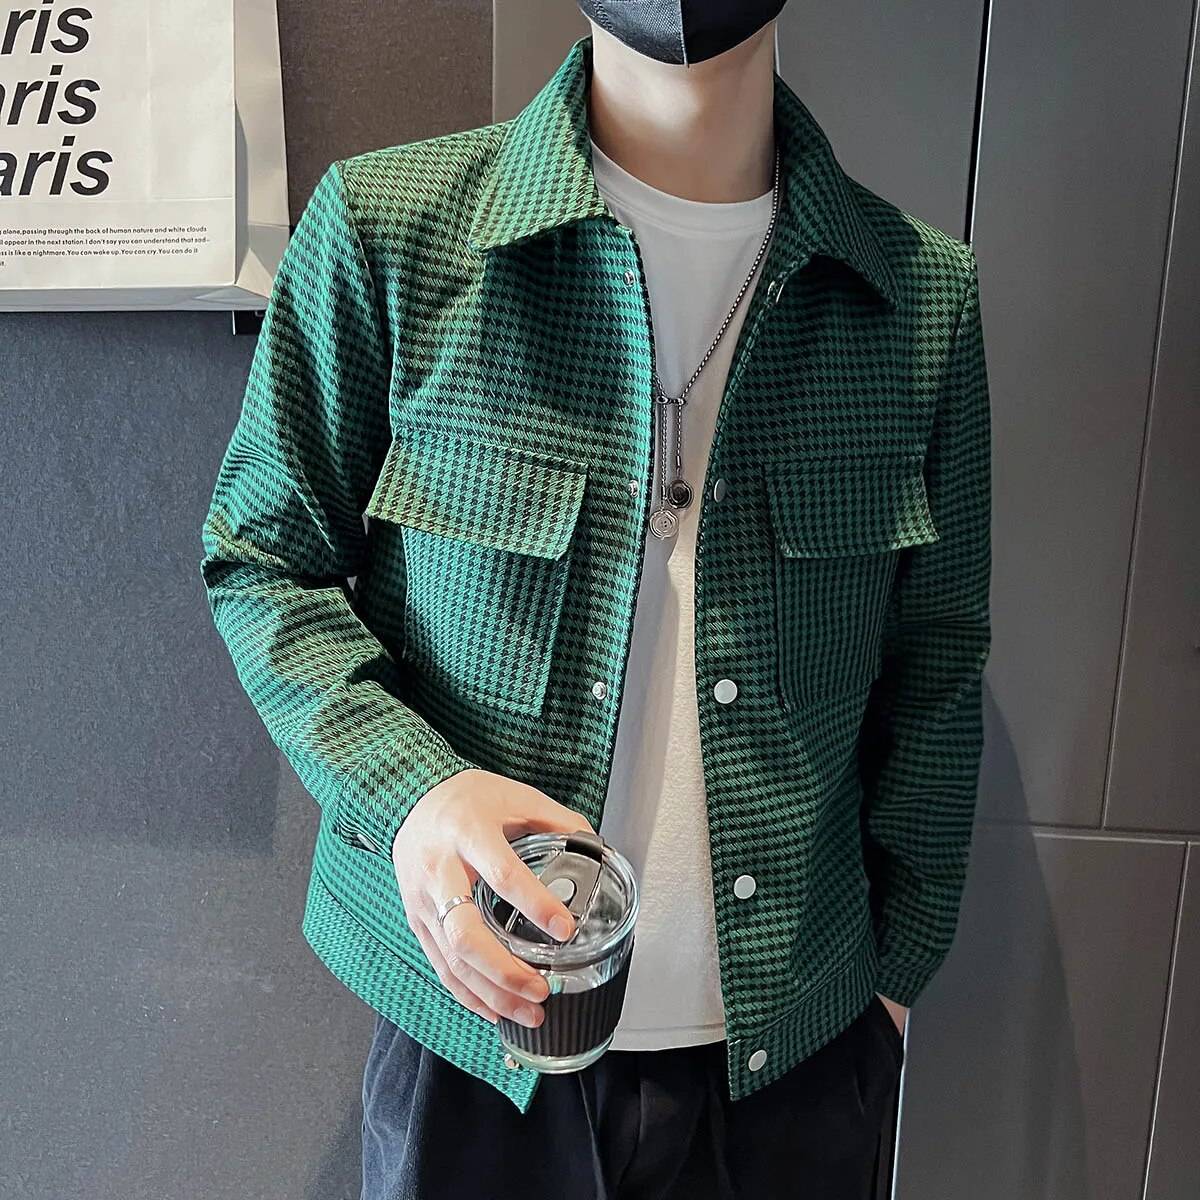 Casual Slim Fit Plaid Jacket for stylish everyday wear2